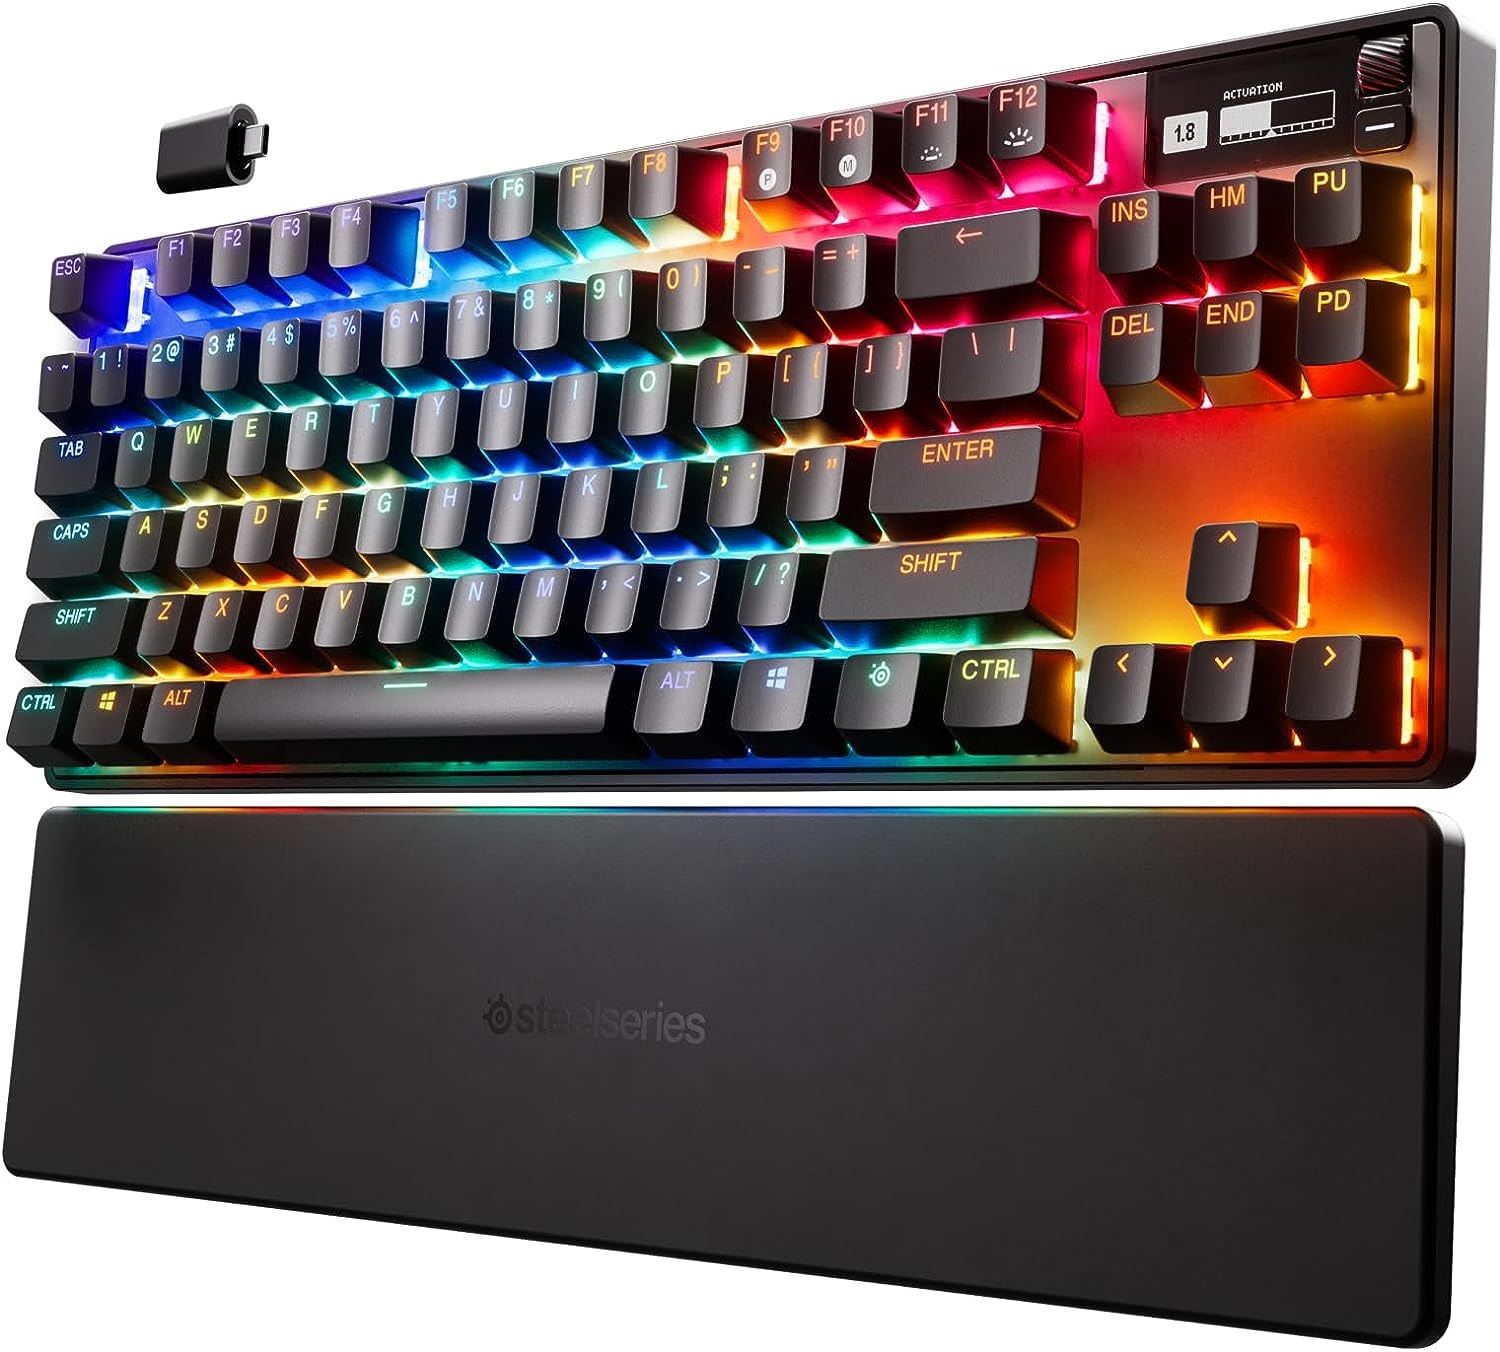 steelseries apex pro with tenkeyless design, wrist rest, and RGB